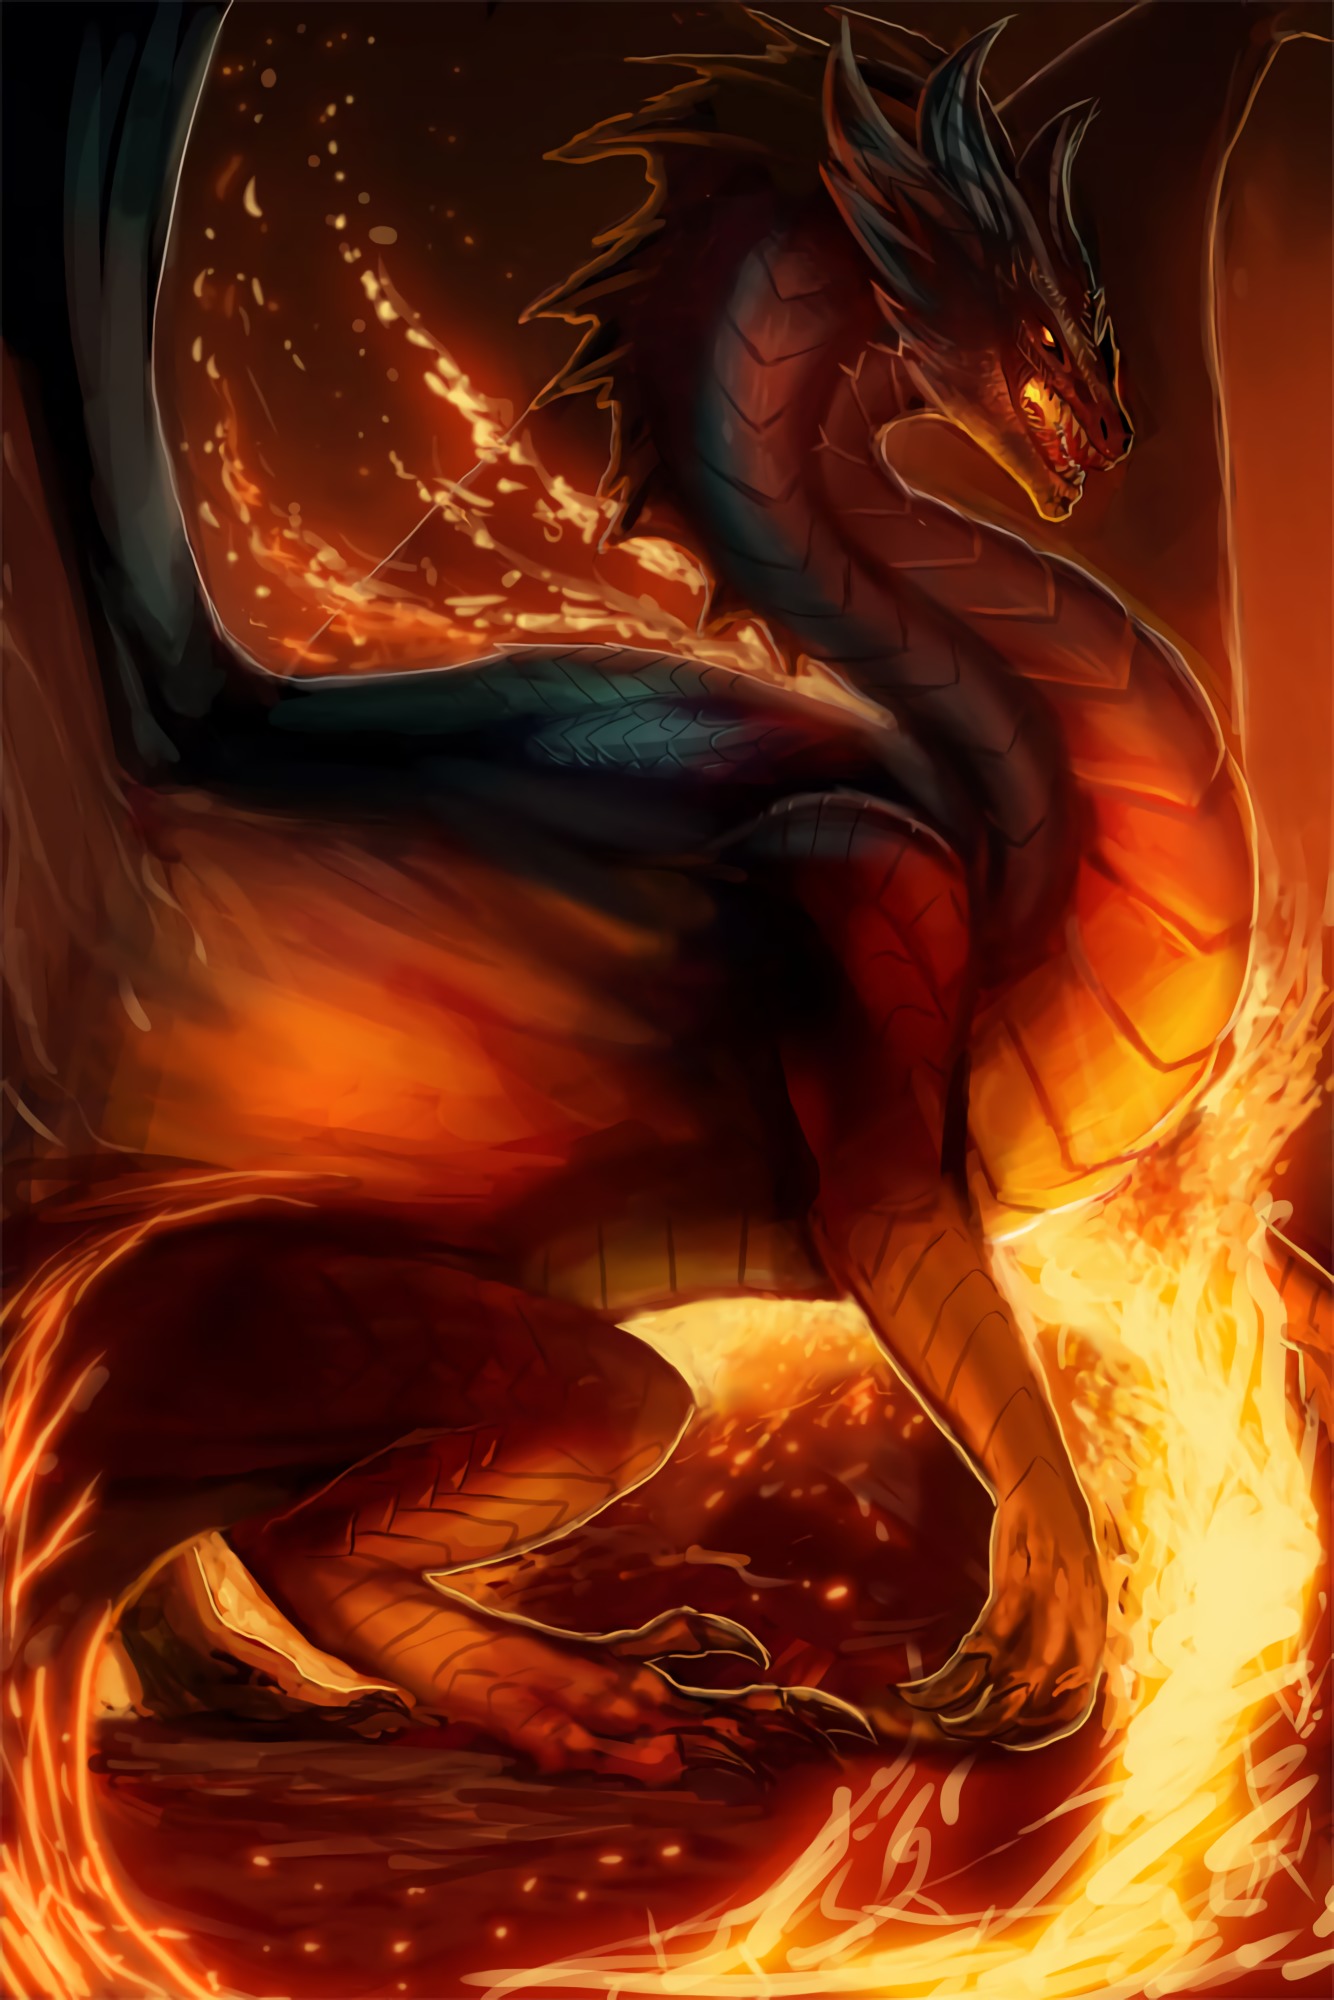 fiction, dragon, art, fire, being, creature, that's incredible